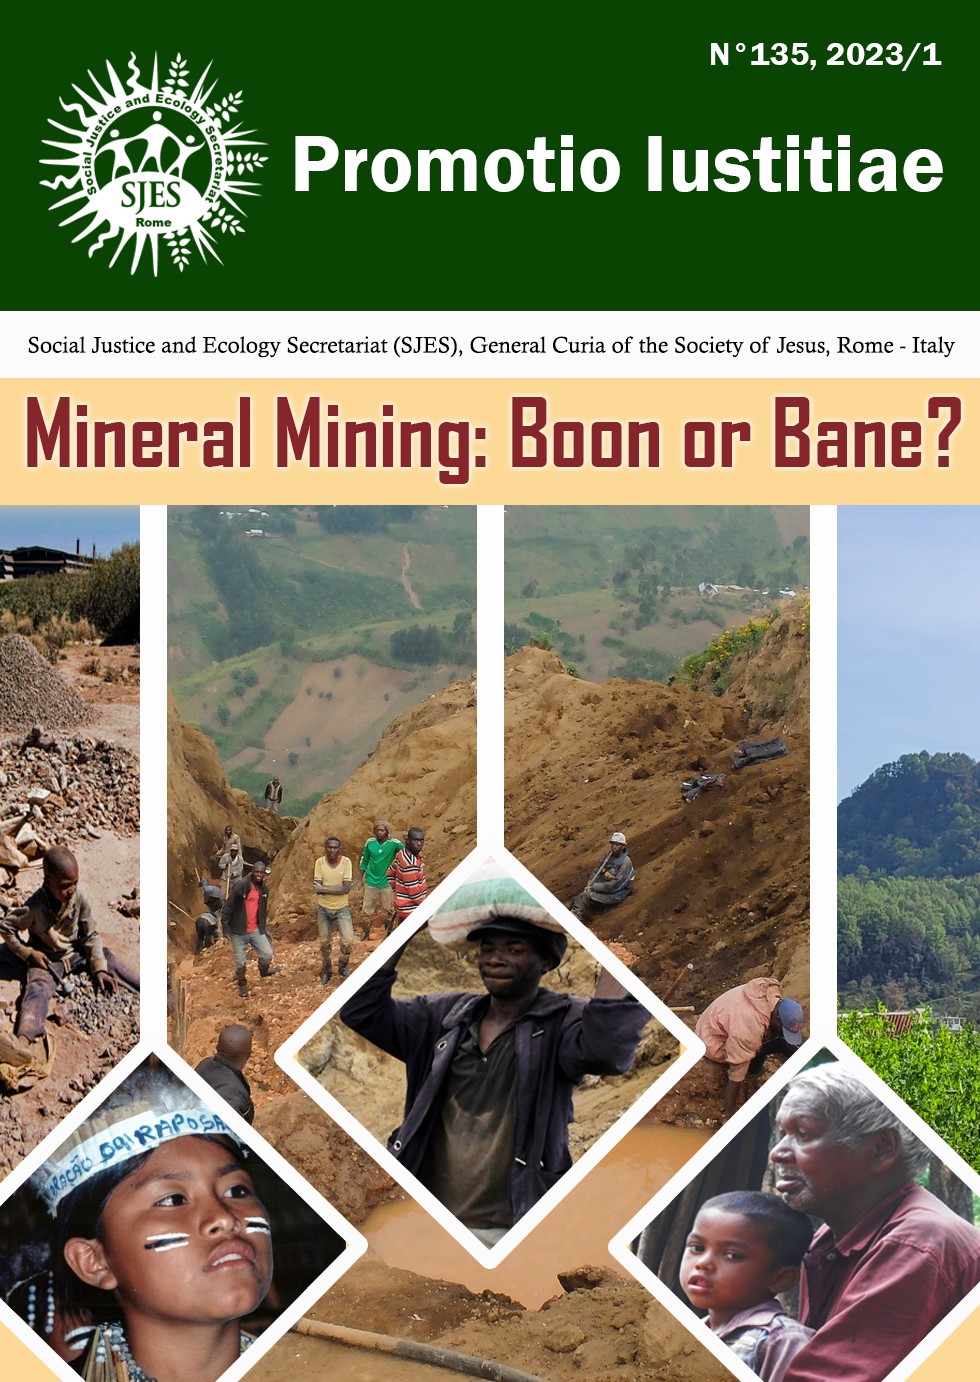 Mineral Mining: Boon or Bane?